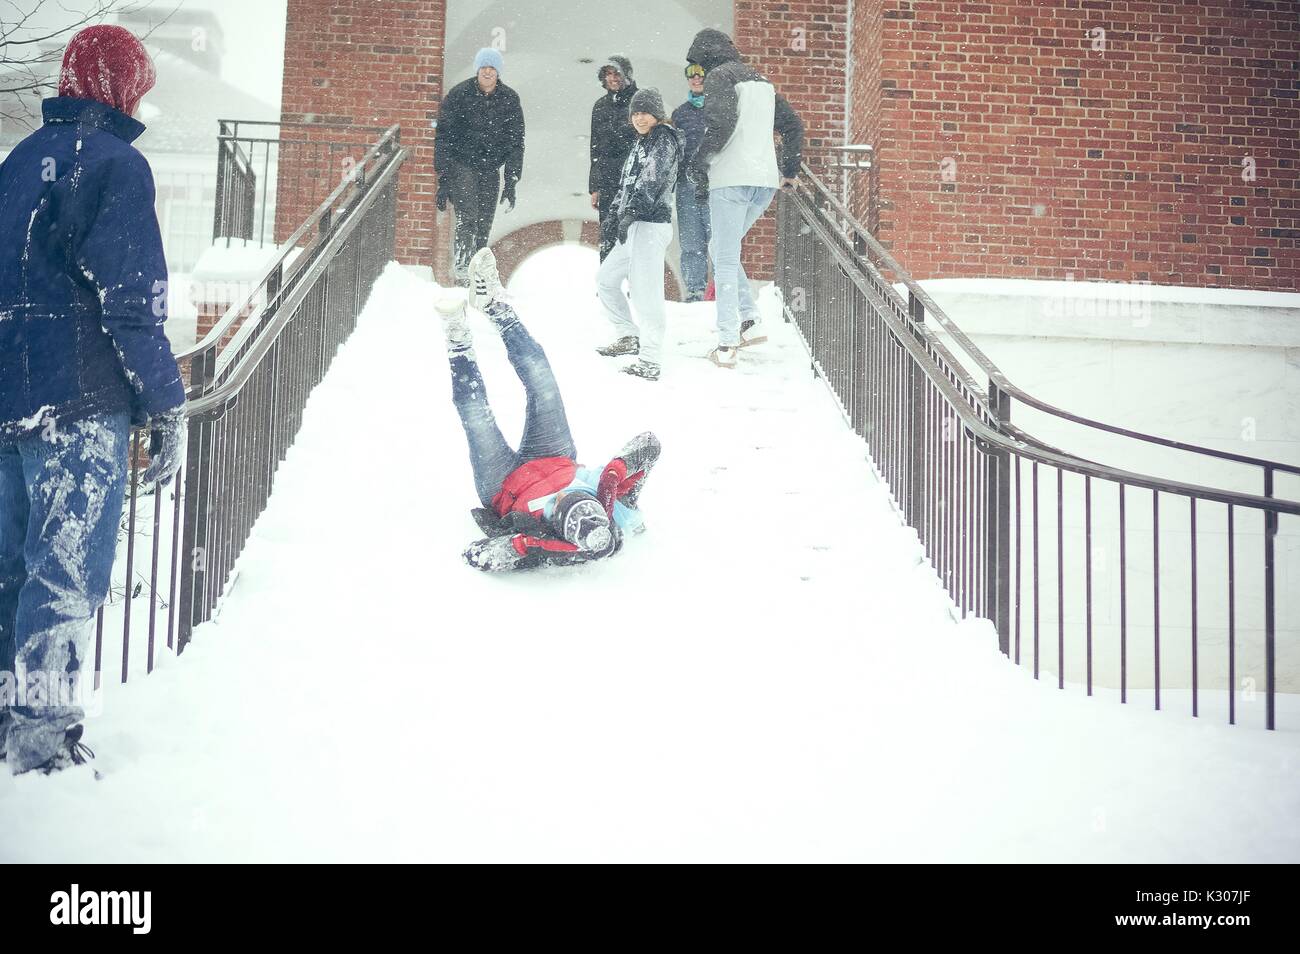 A student slides down the snowy stairs with legs in air and arms around head, while students dressed in snow gear laugh and cheer him on from the top of the staircase, during a snow day at Johns Hopkins University, Baltimore, Maryland, 2016. Stock Photo